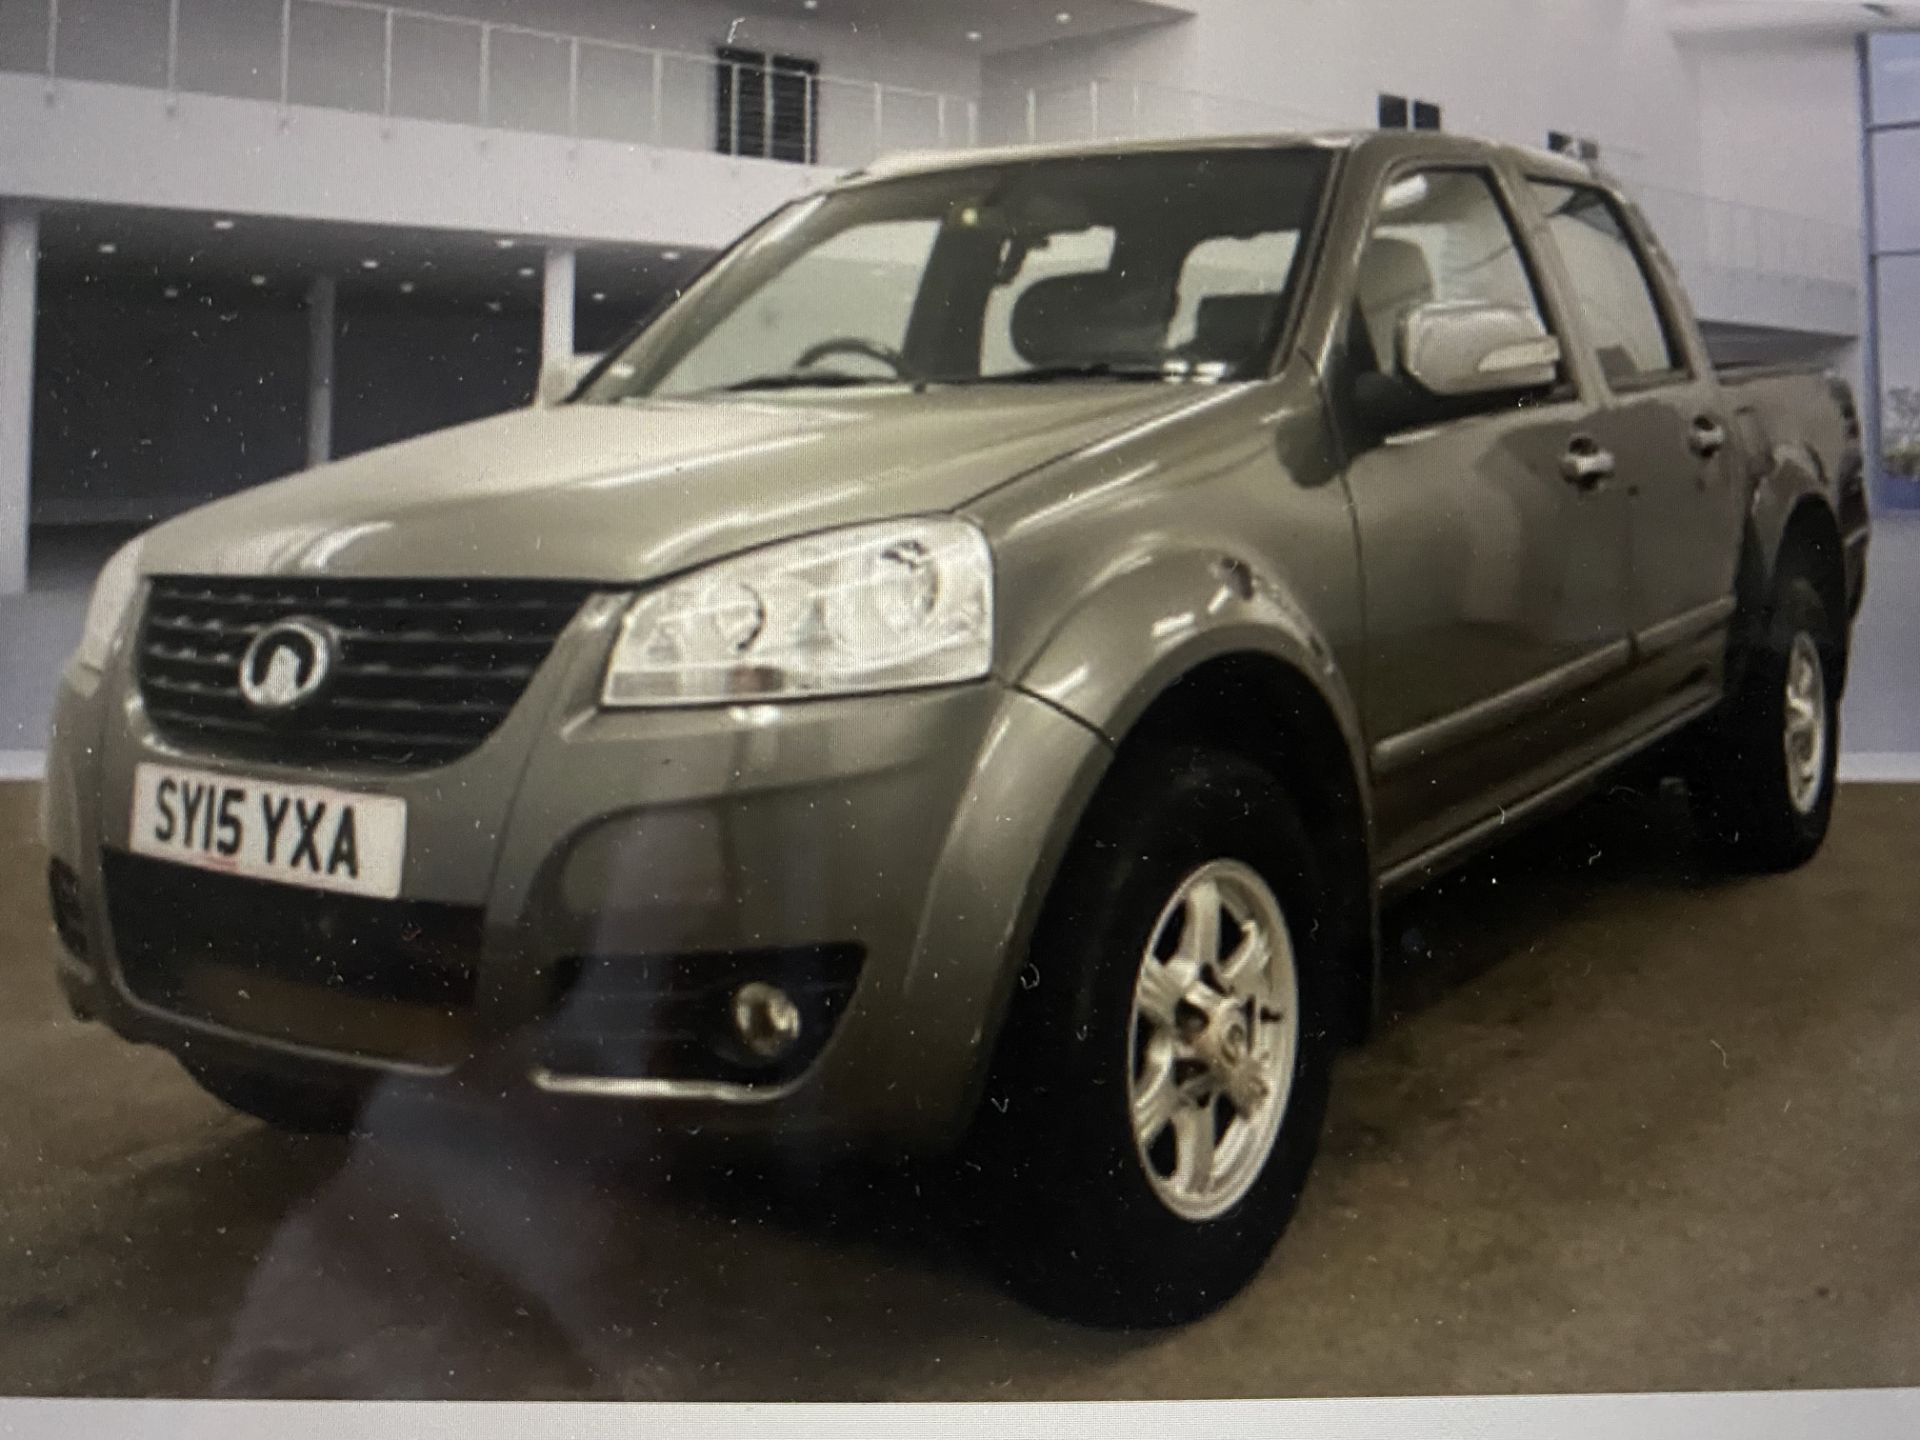 (ON SALE) GREAT WALL STEAD 2.0TD "S" 4X4 - 15 REG - LEATHER - AIR CON - ALLOYS -ONLY 77K- NO VAT !!! - Image 2 of 6